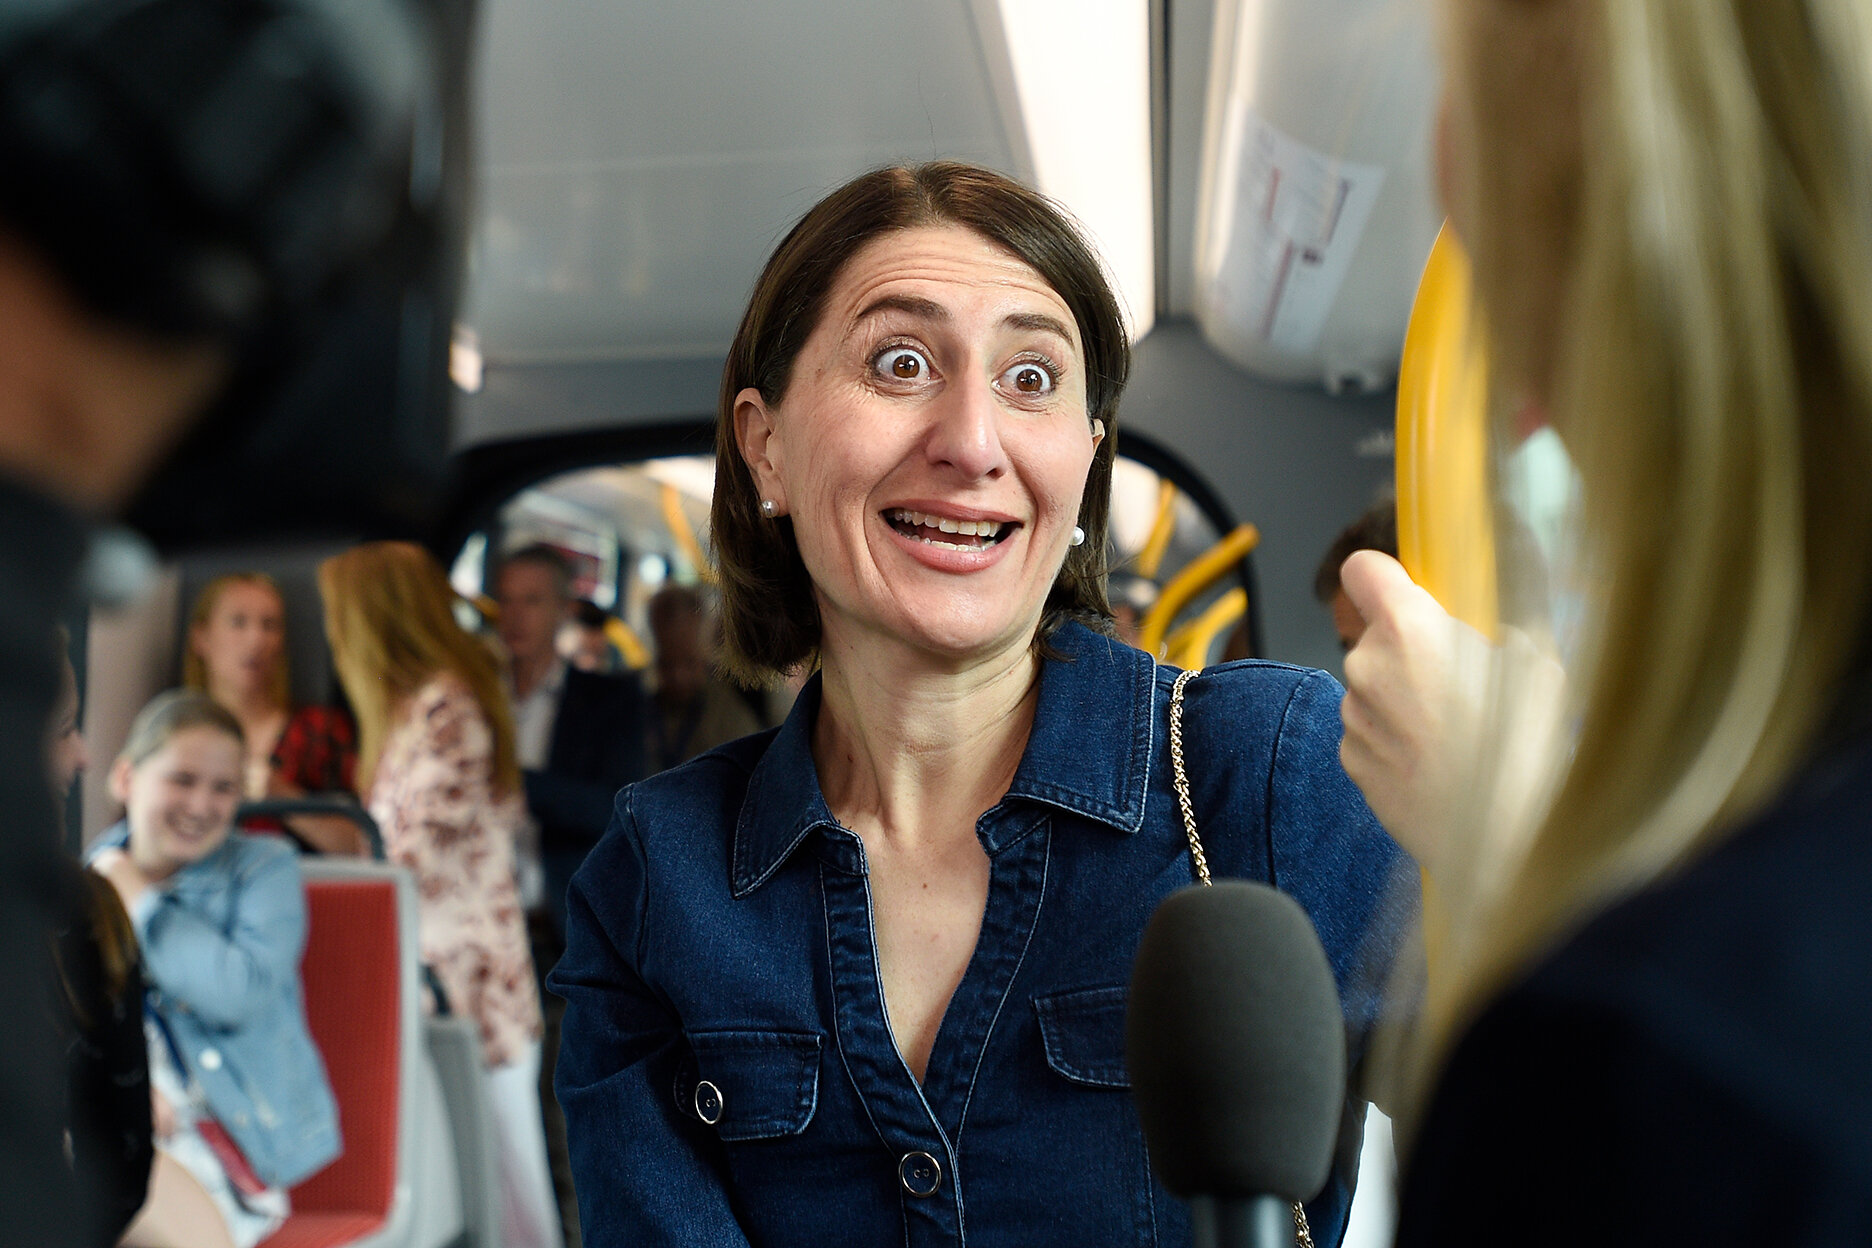  NSW Premier Gladys Berejiklian is seen onboard the new light rail after opening it to passengers at Circular Quay in Sydney, Saturday, December 14, 2019. (AAP Image) 